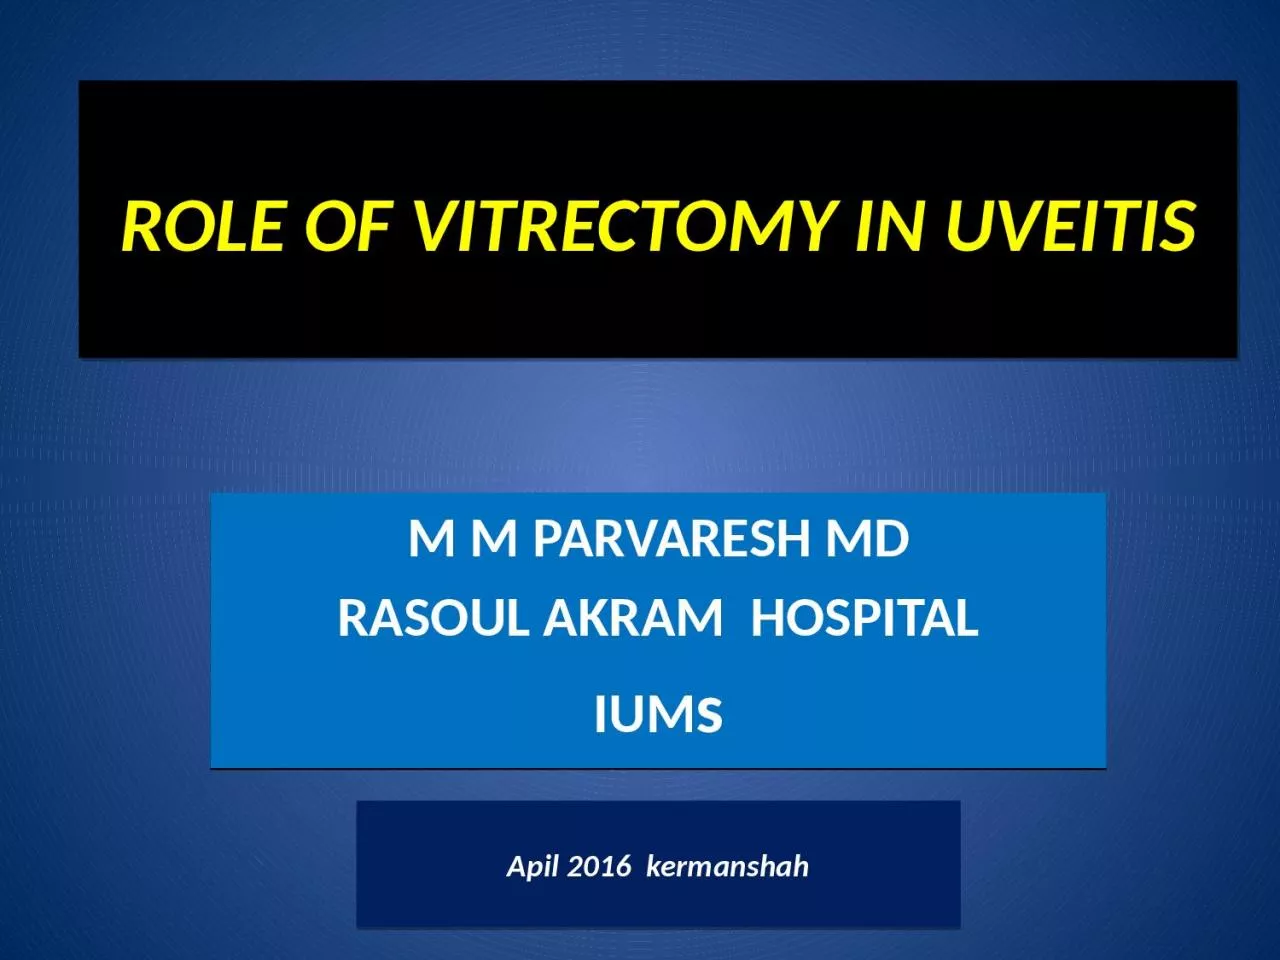 ROLE OF VITRECTOMY  IN UVEITIS